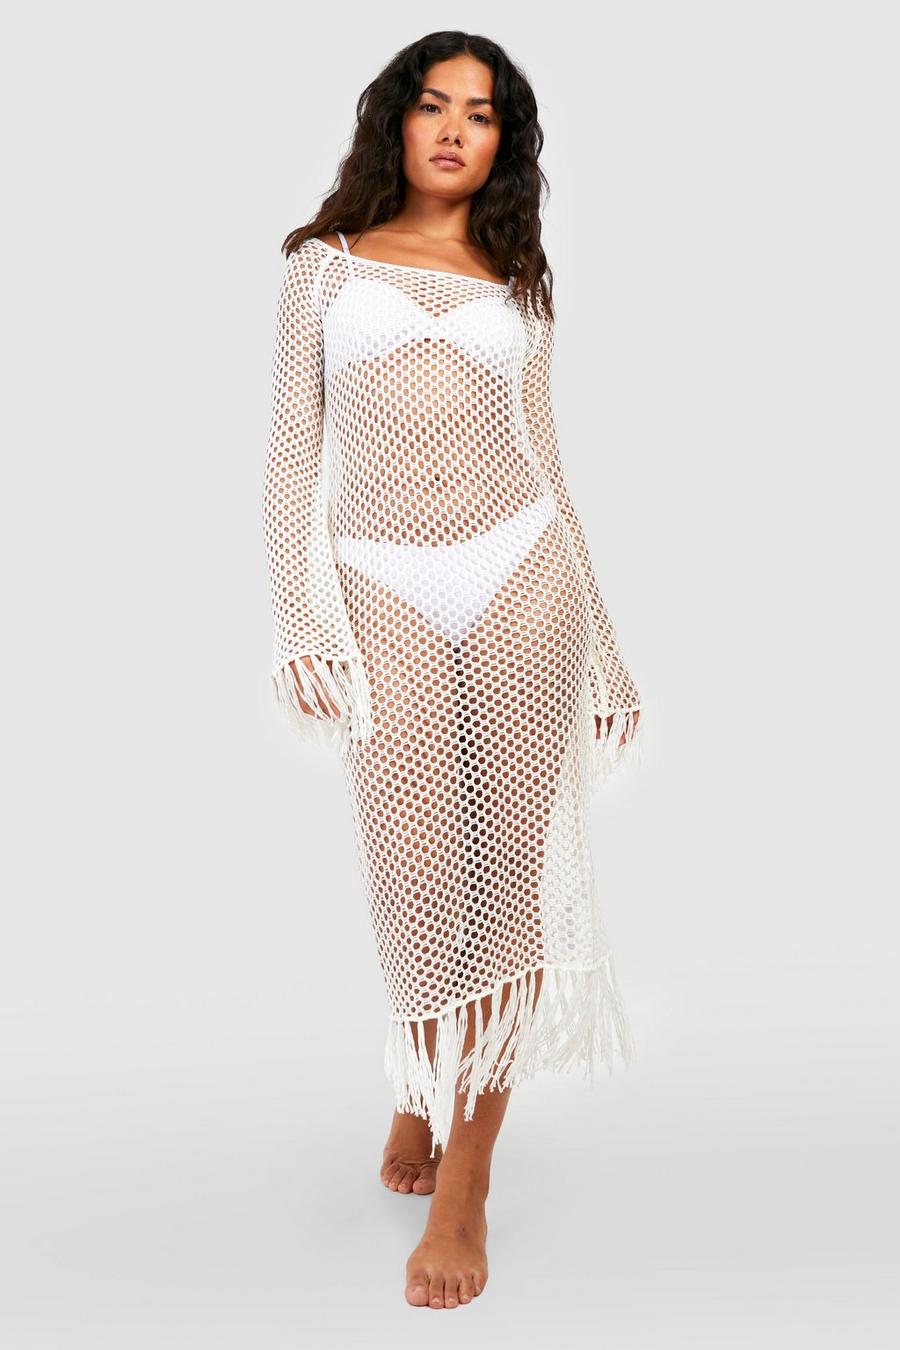 Cream Crochet Fringed Cover Up Beach Dress image number 1